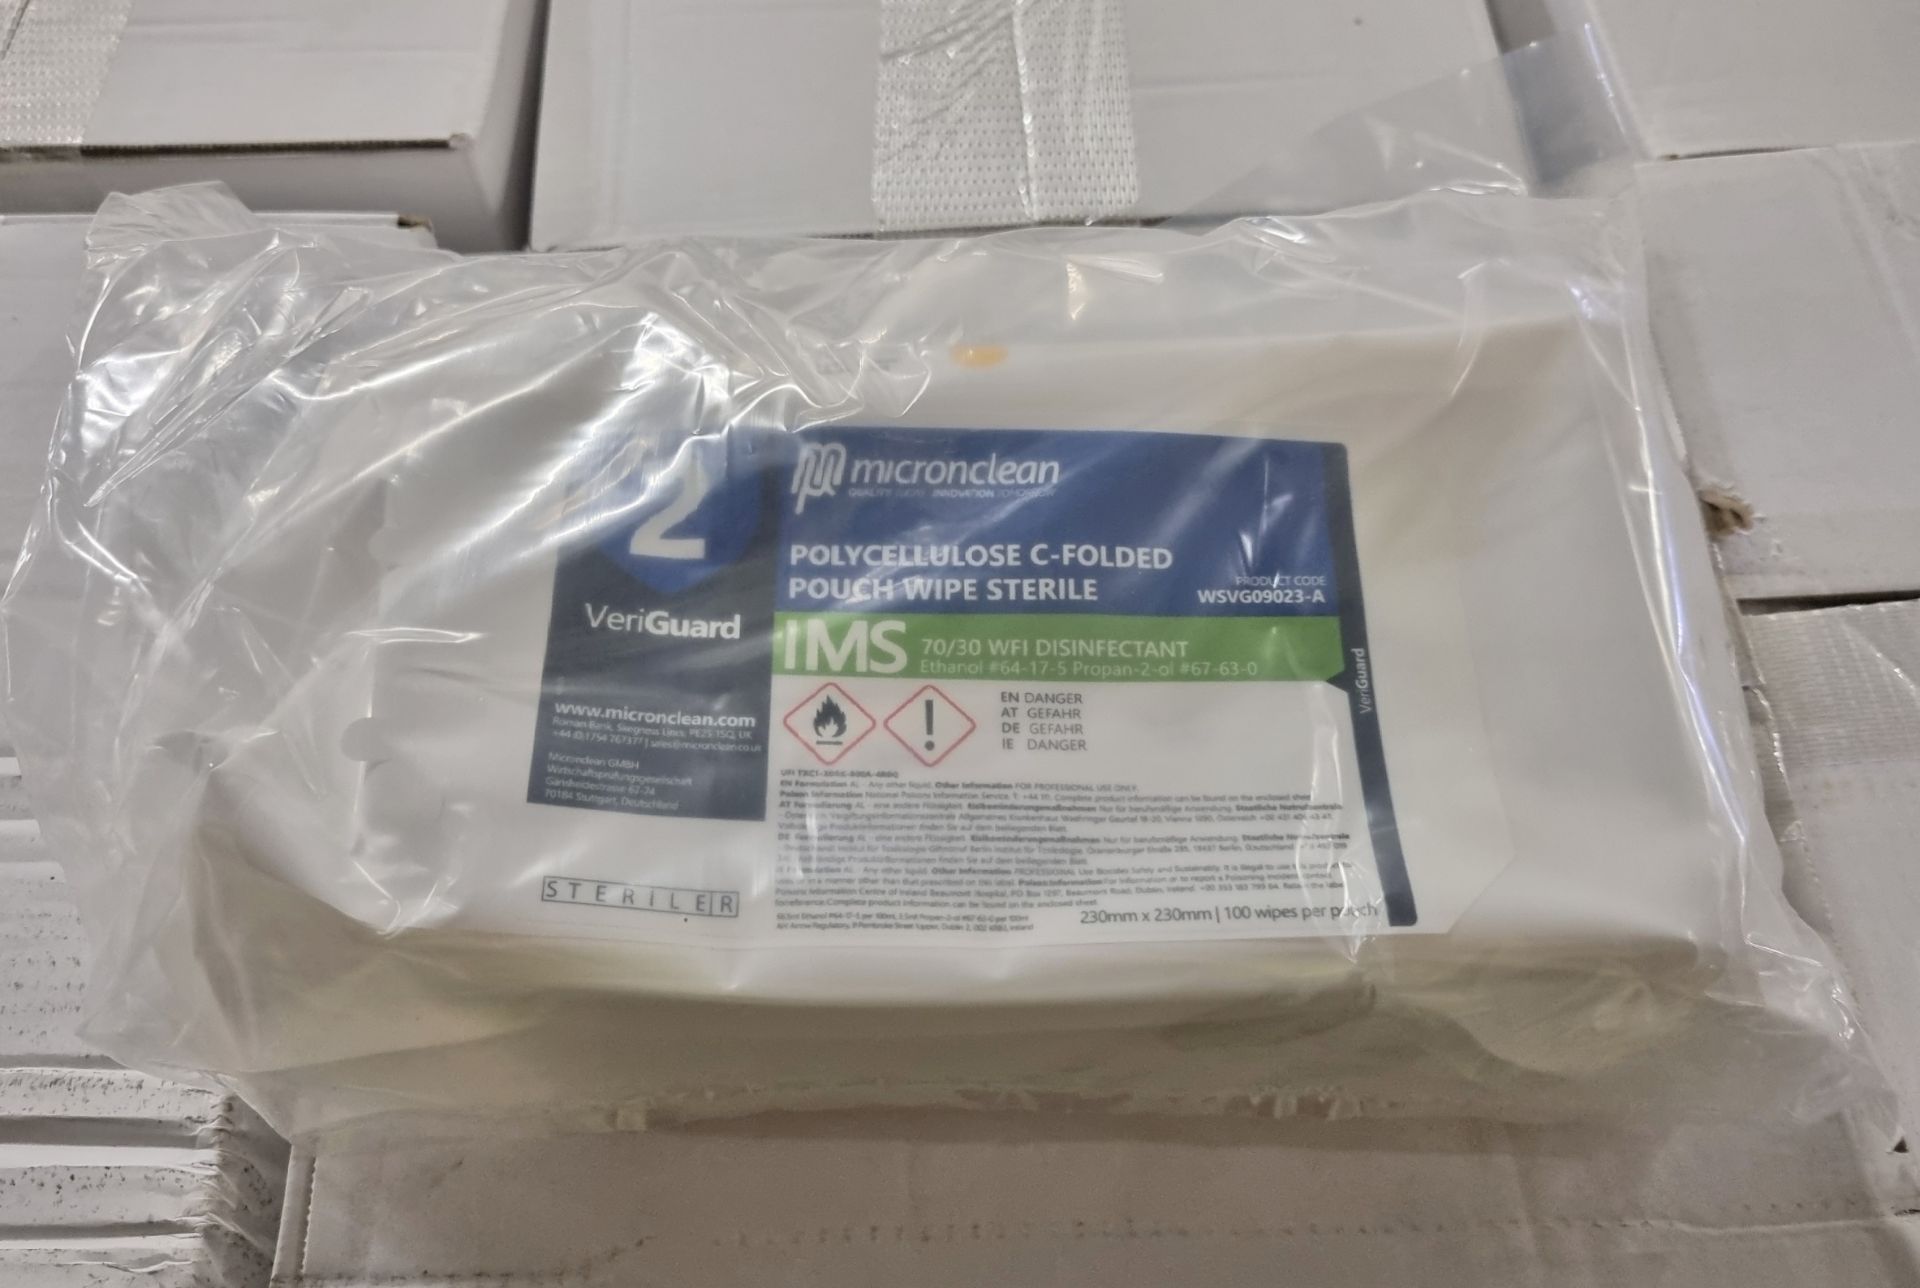 33x boxes of Micronclean Veriguard Polycellulose C-folded pouch wipe sterile - 230mm x 230mm - Bild 2 aus 4